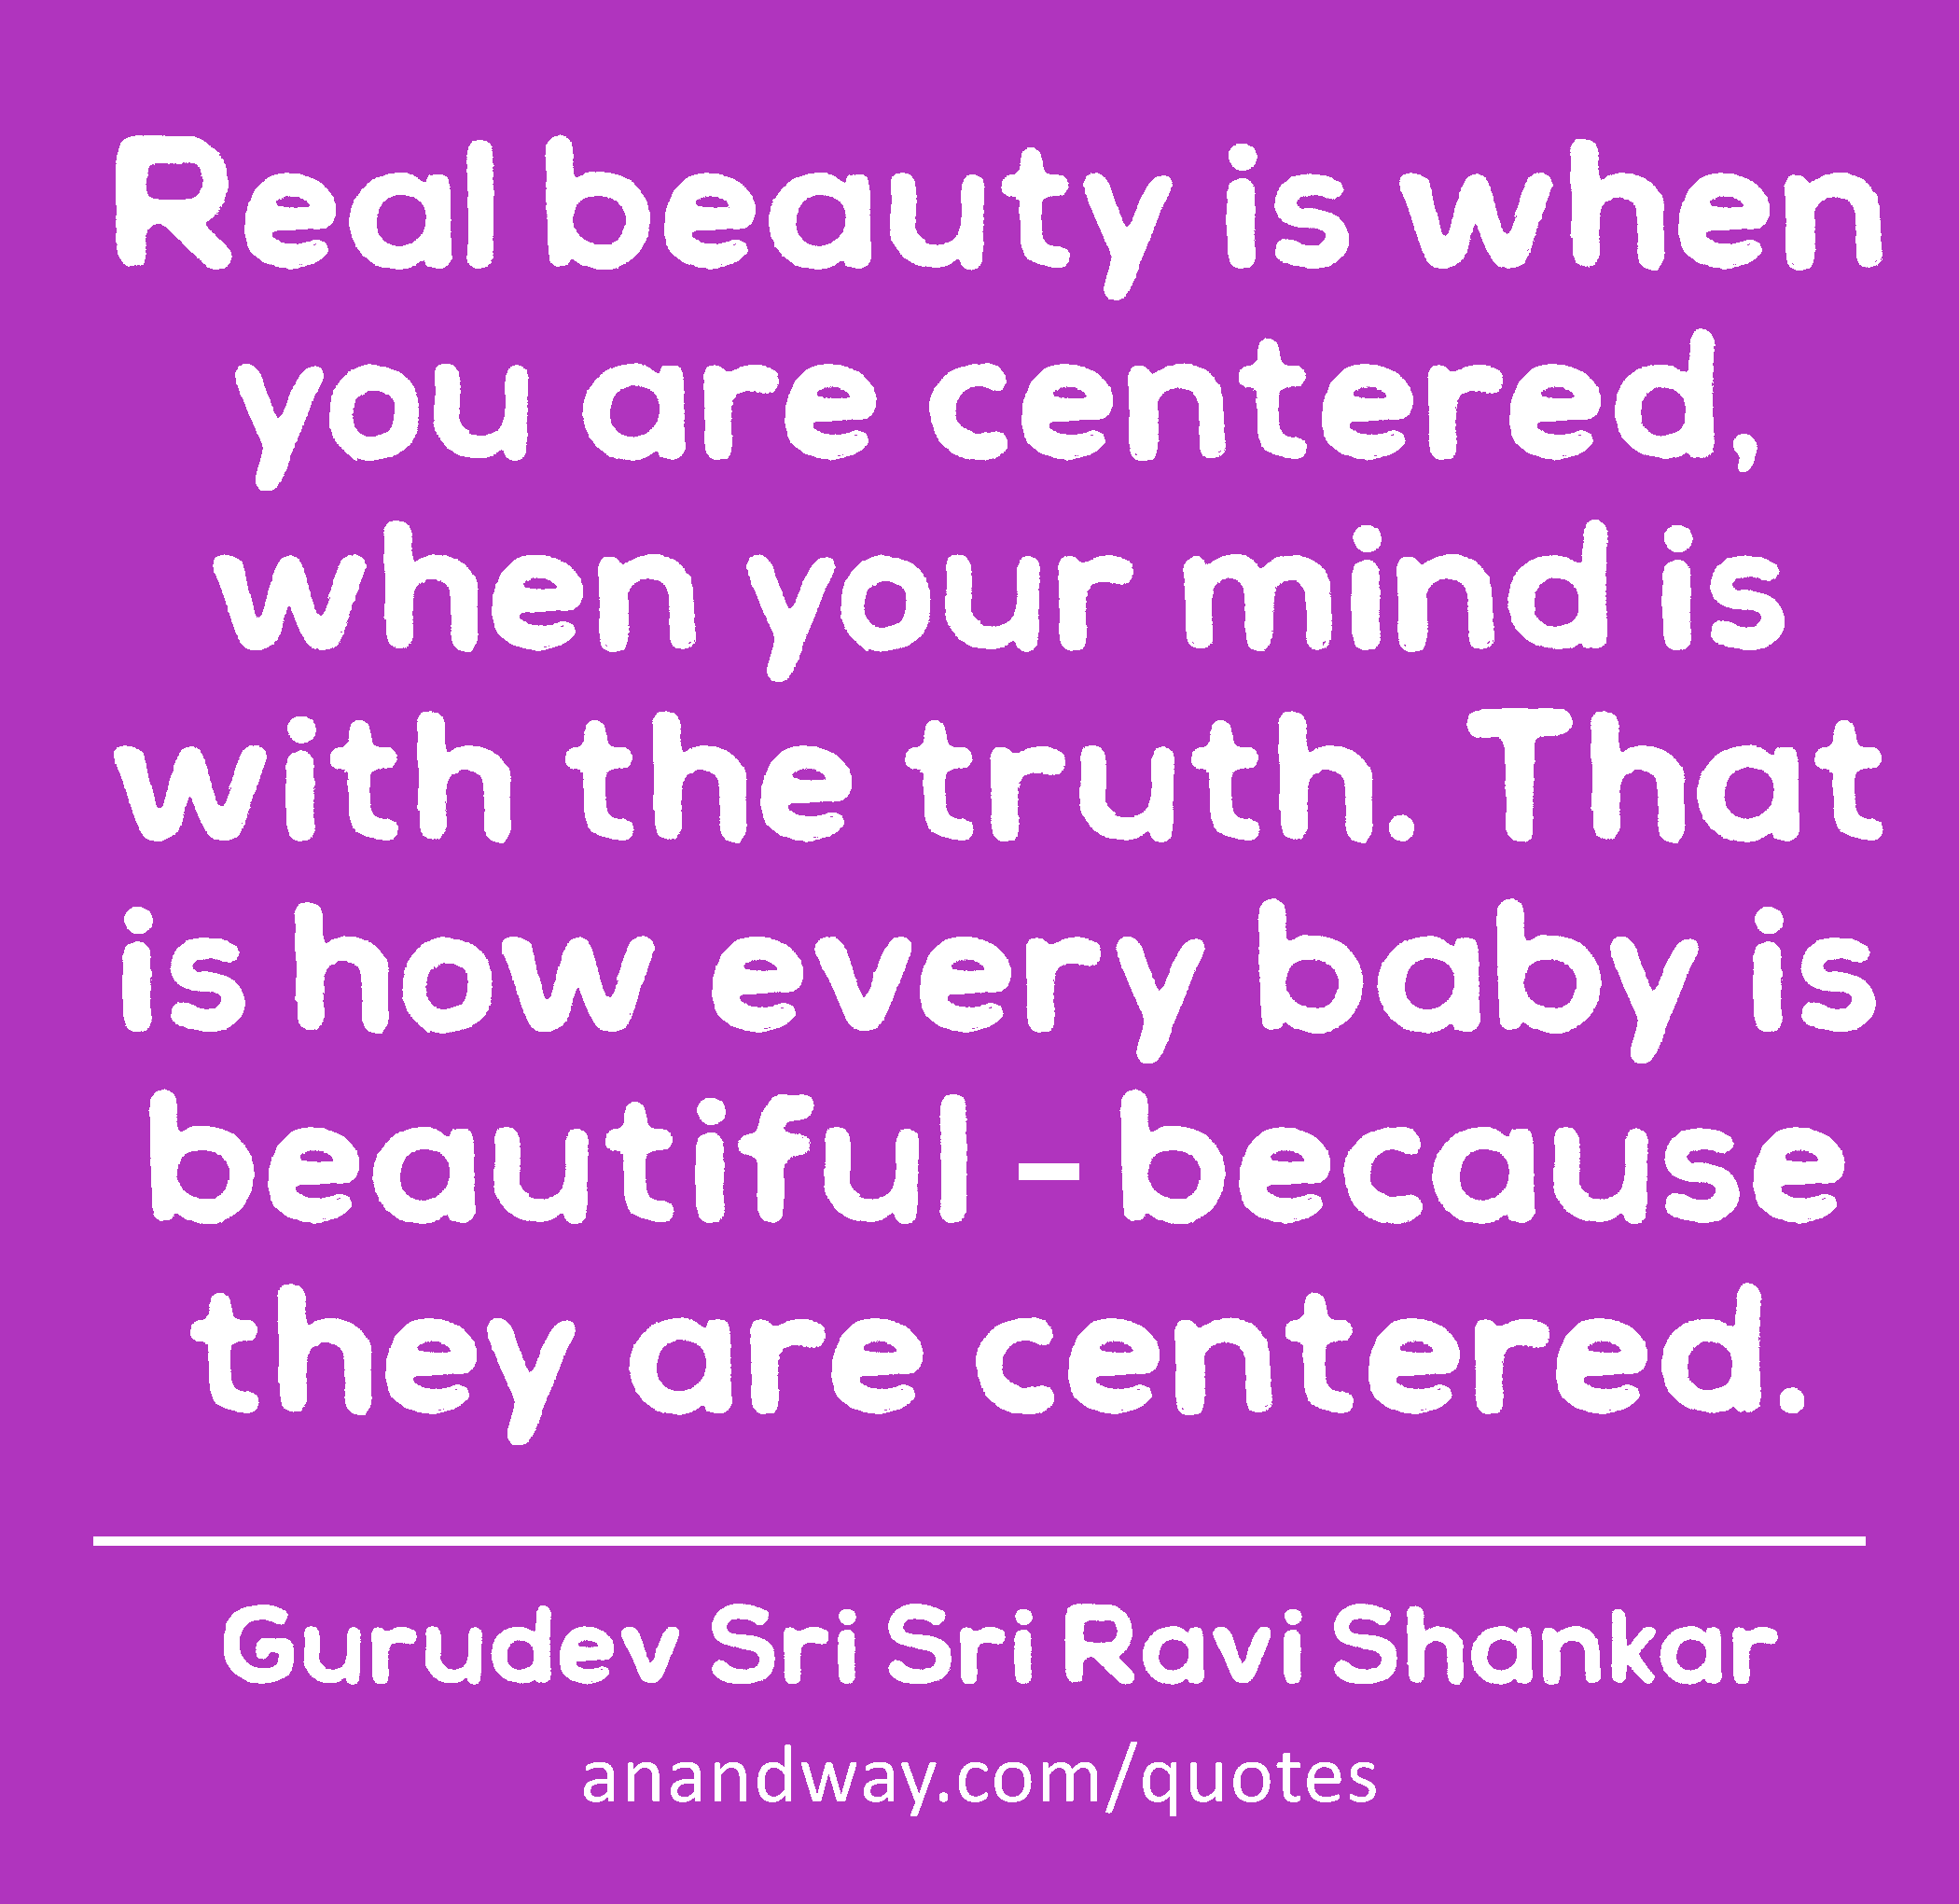 Real beauty is when you are centered, when your mind is with the truth. That is how every baby is
 -Gurudev Sri Sri Ravi Shankar